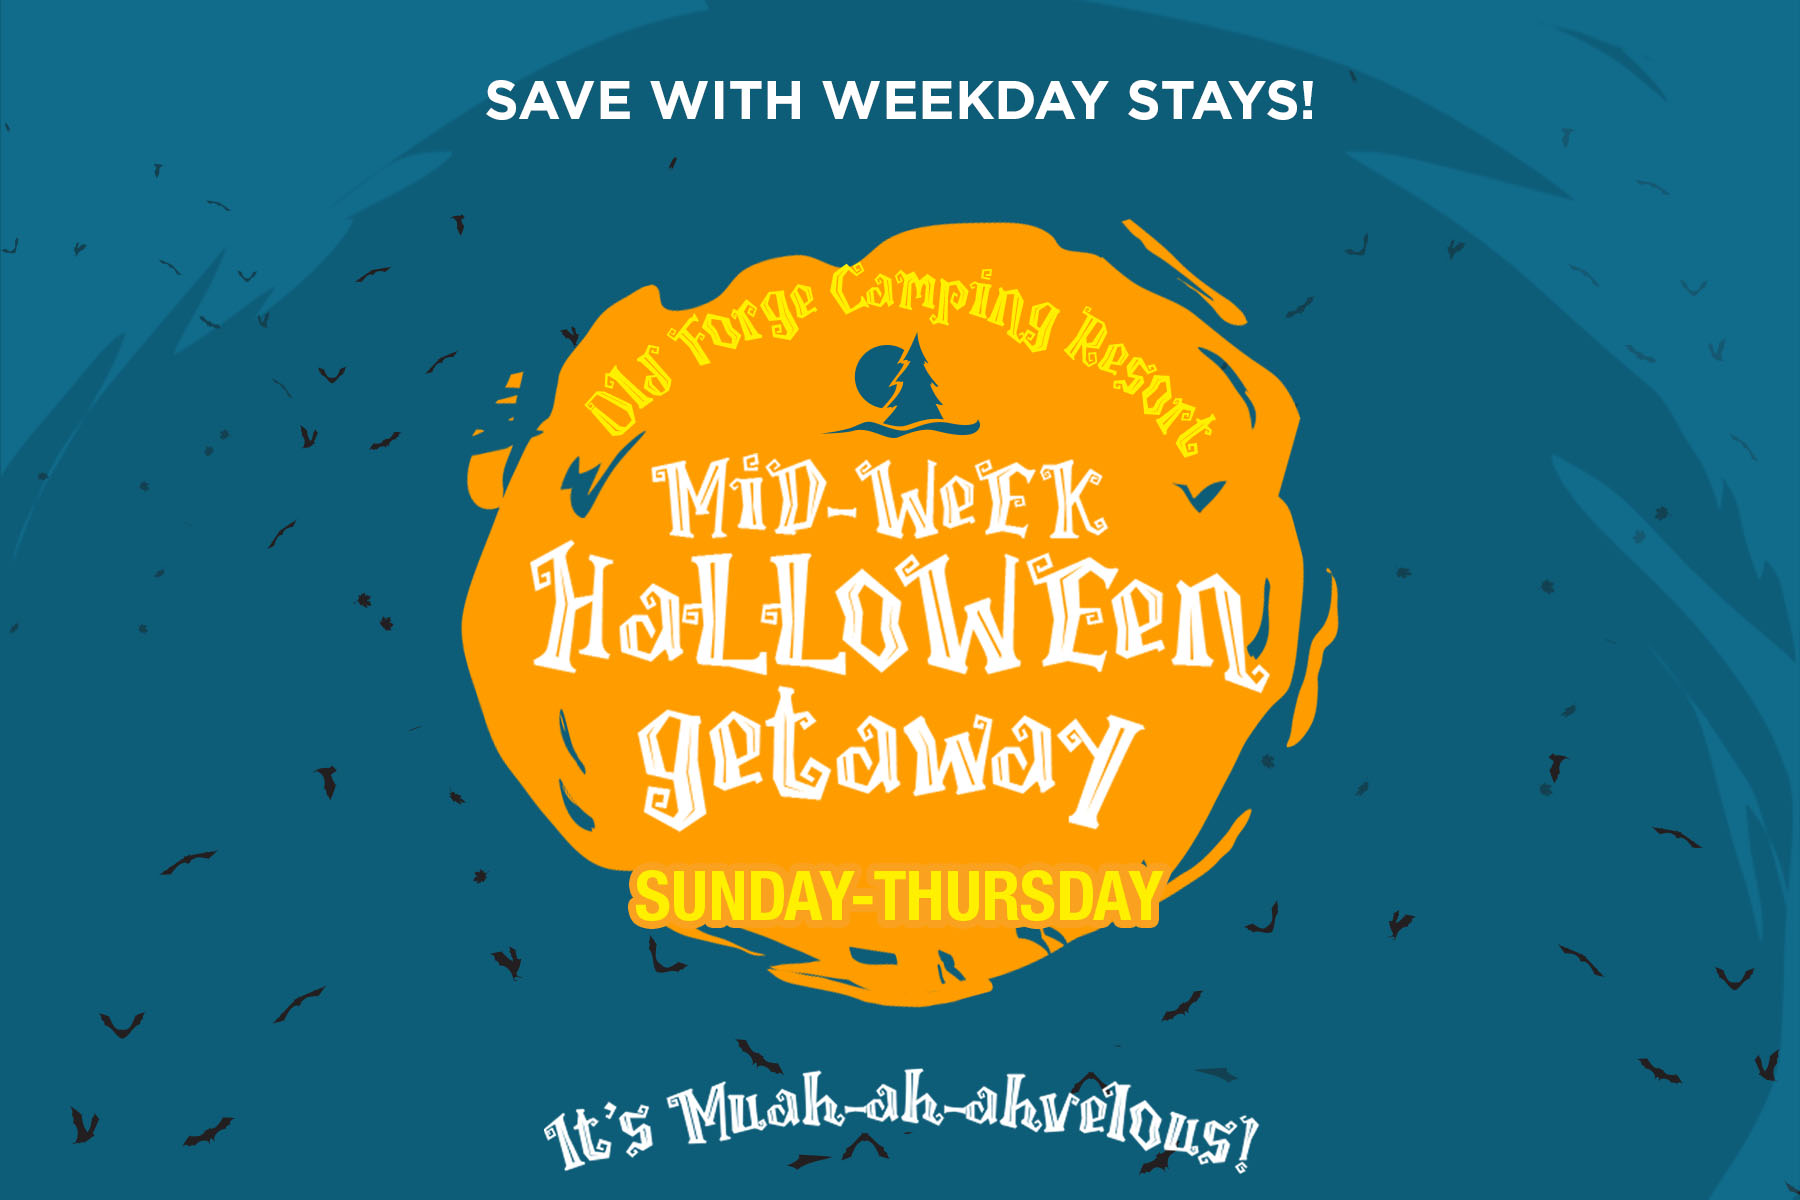 SAVE with Our Mid-Week Halloween Getaway!